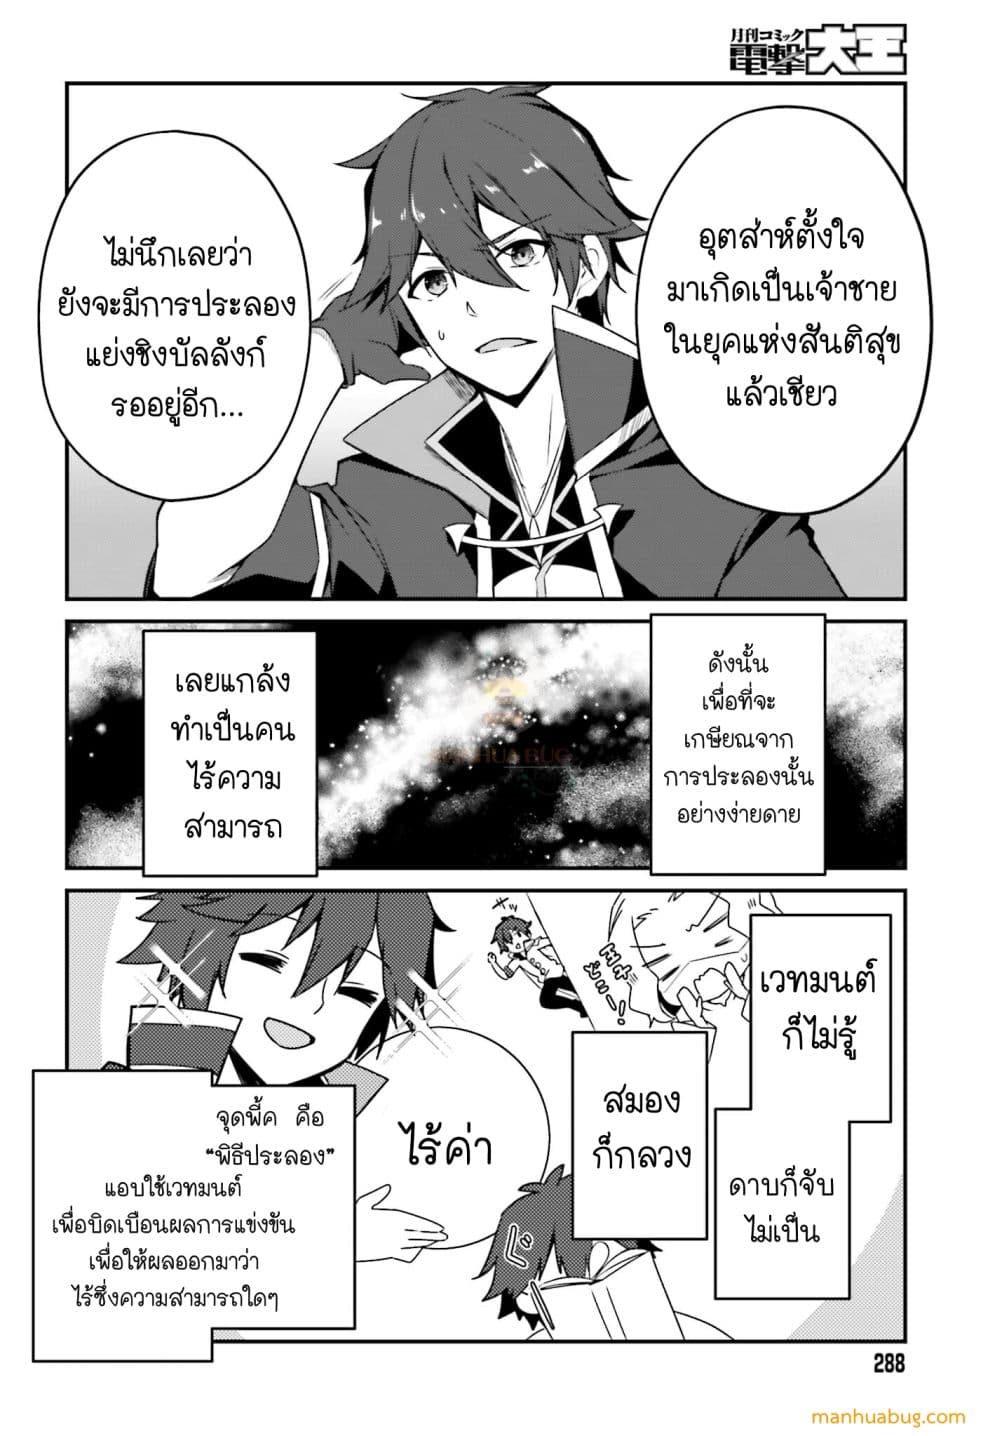 THE INCOMPETENT PRINCE WHO HAS BEEN BANISHED WANTS TO HIDE HIS ABILITIES~ ตอนที่ 1 (21)